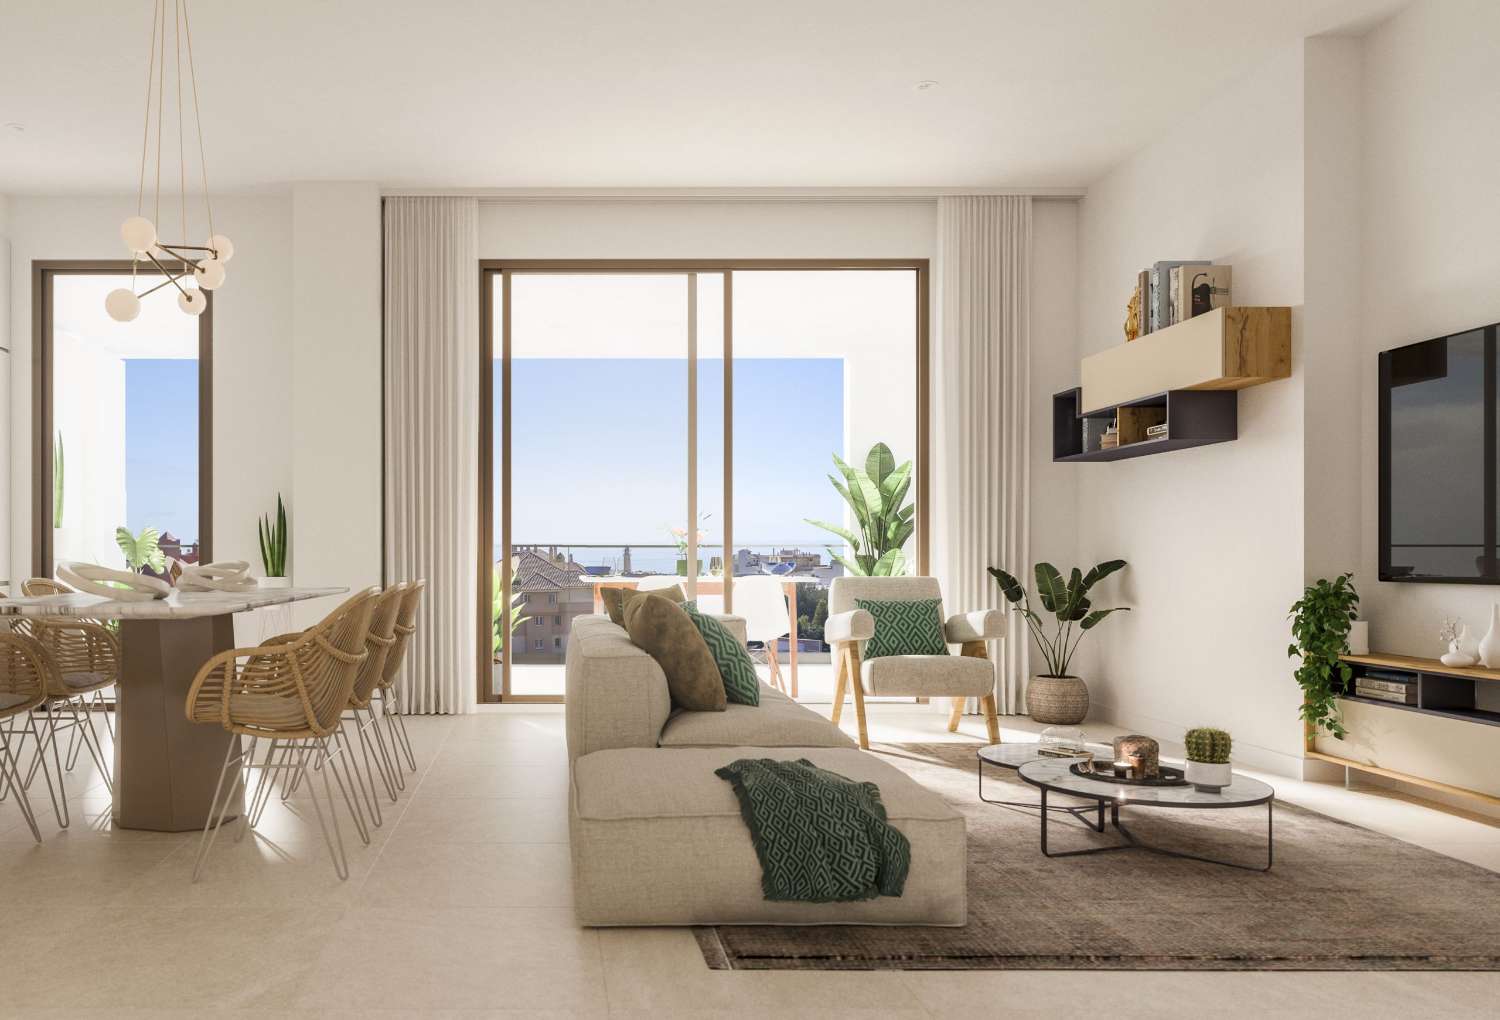 2 or 3 bedrooms, 2 bathrooms and a terrace overlooking the sea – from € 218.000